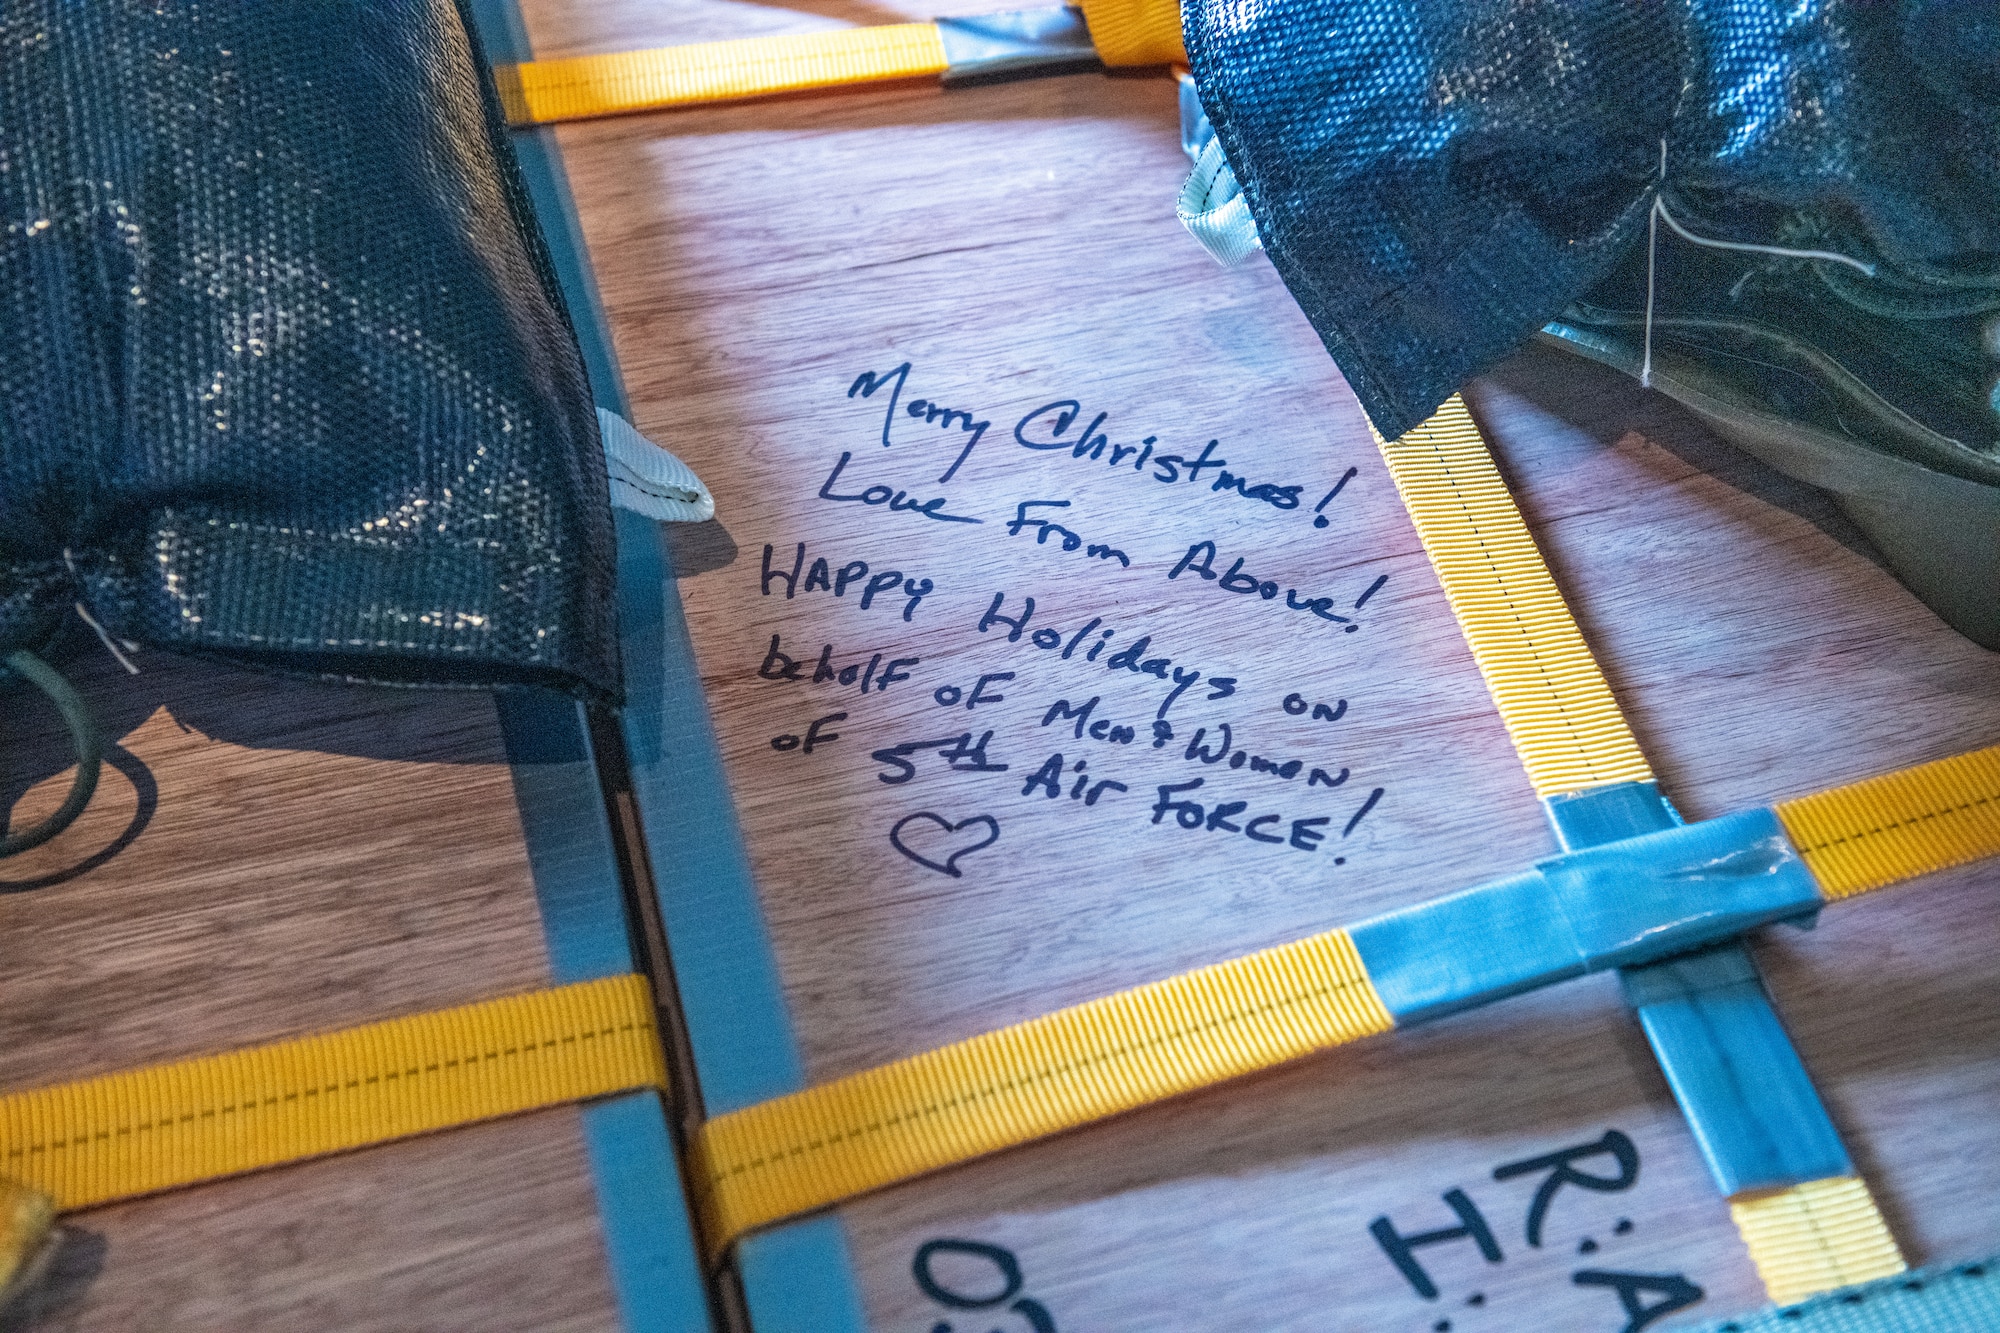 A written holiday message on a bundle aboard